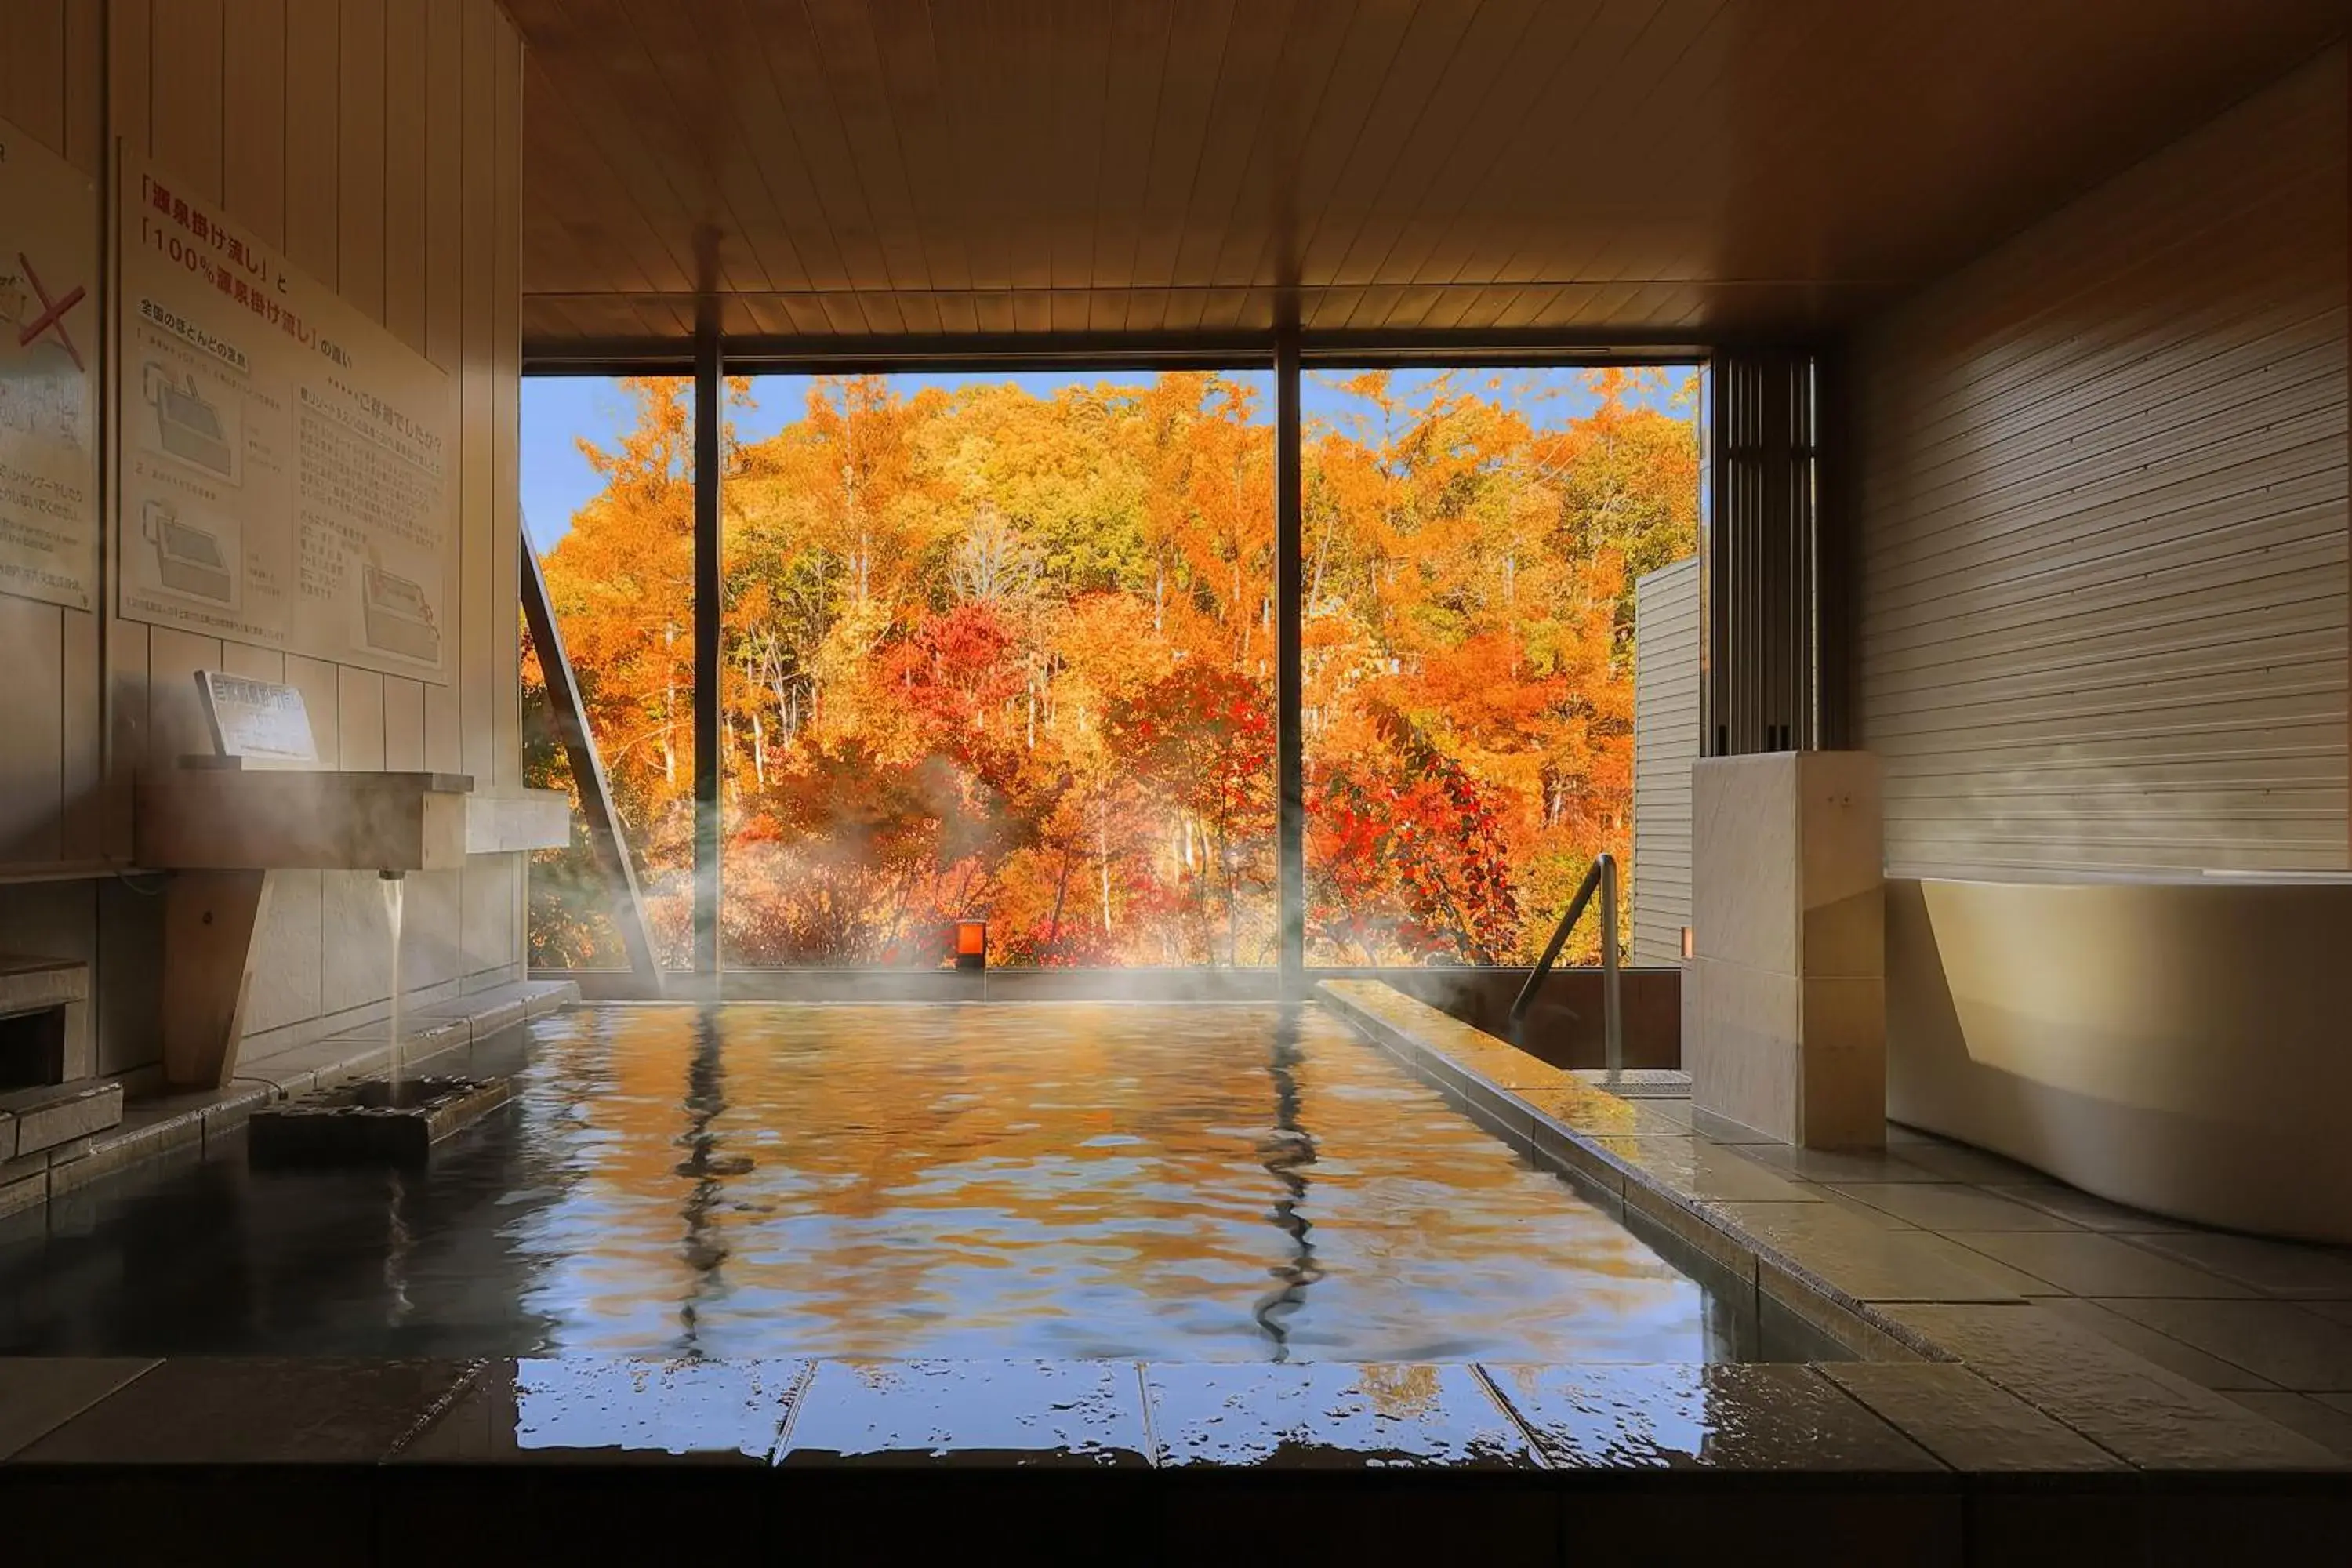 Hot Spring Bath, Swimming Pool in Hotel Ryu Resort and Spa